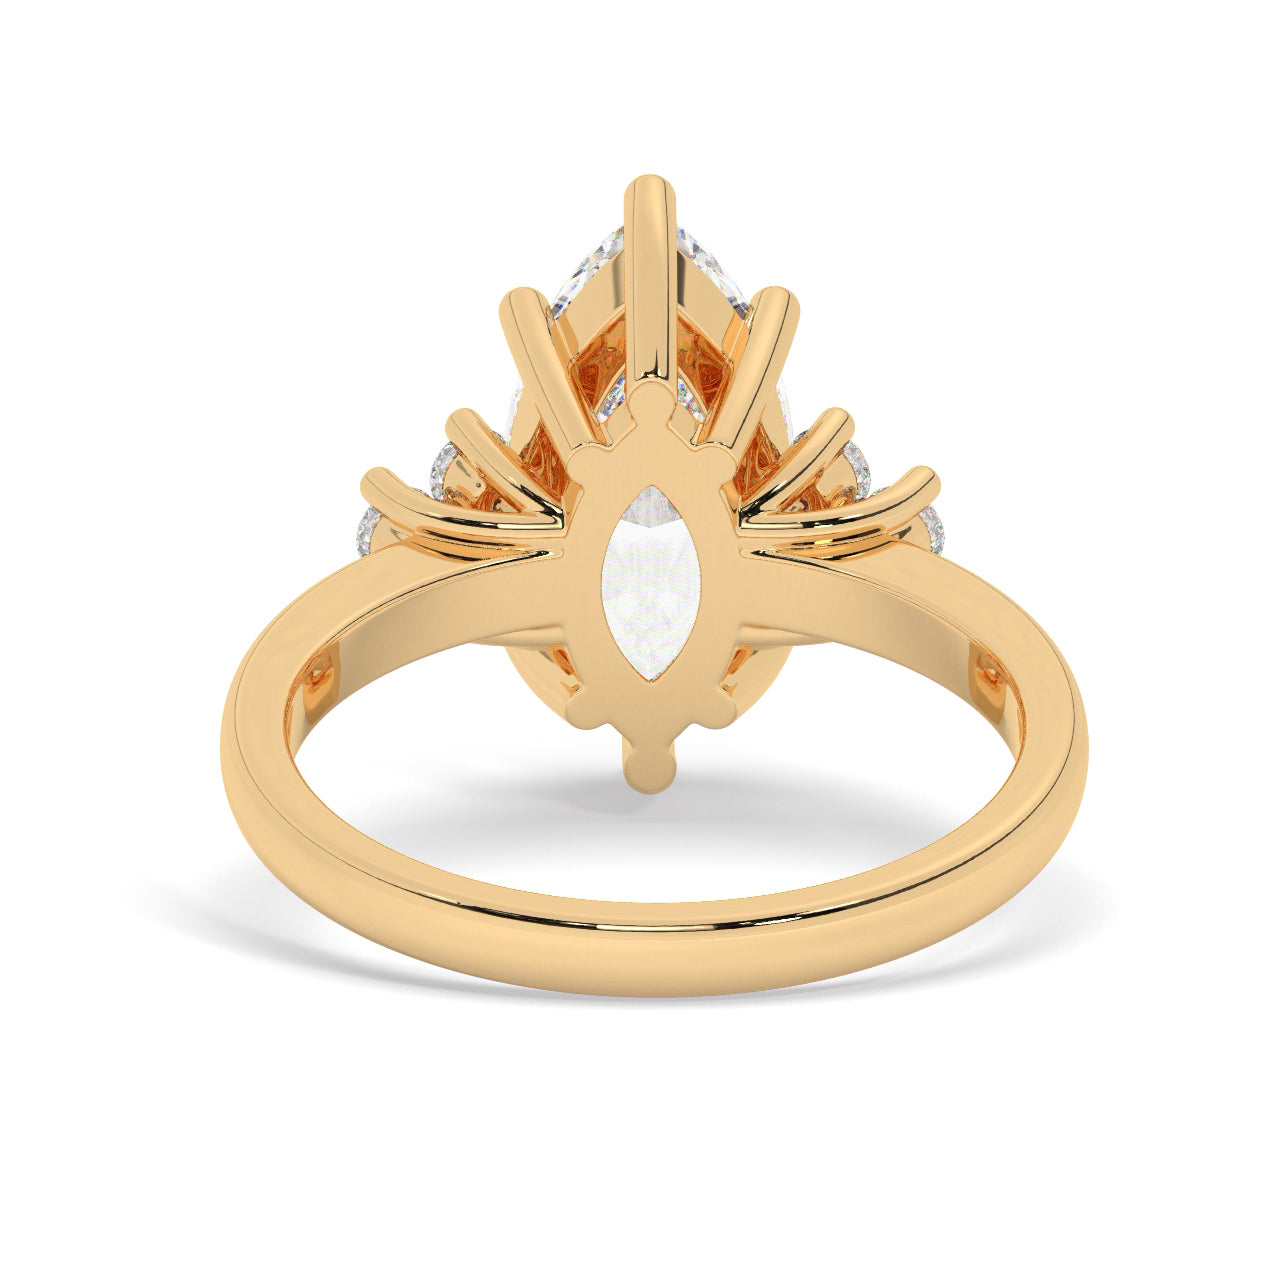 Yellow Gold Marquis Cut Engagement Ring Accompanied by Round Stones - Back View